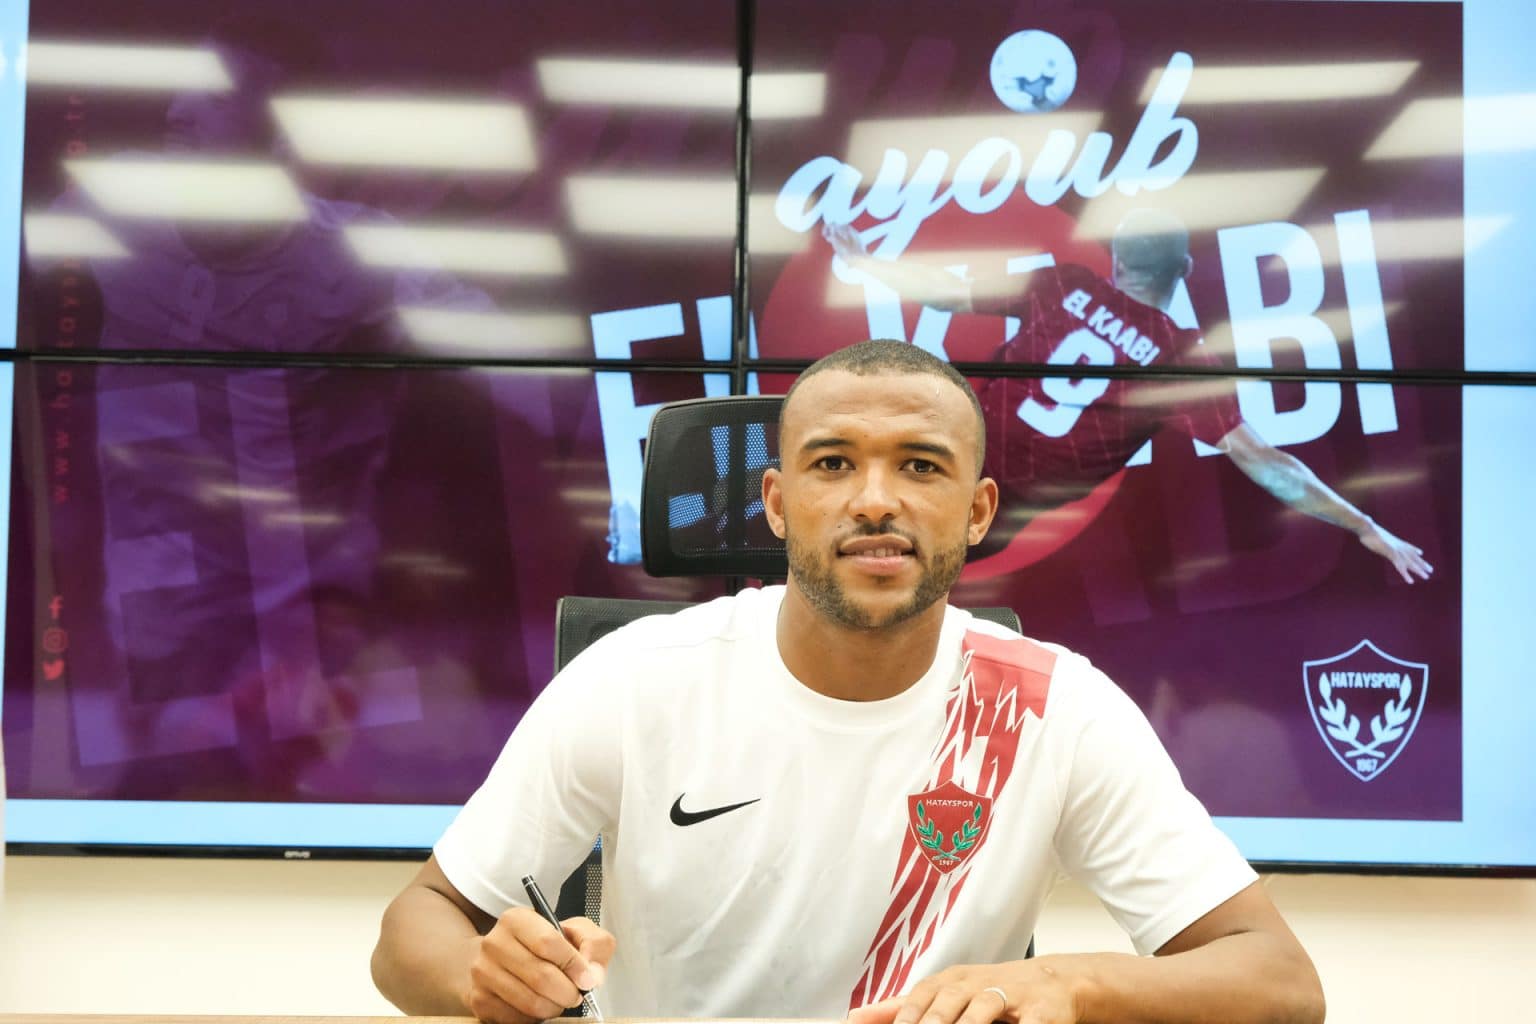  Ayoub El Kaabi celebrates his goal against Olympiacos by signing a contract with Hatayspor.